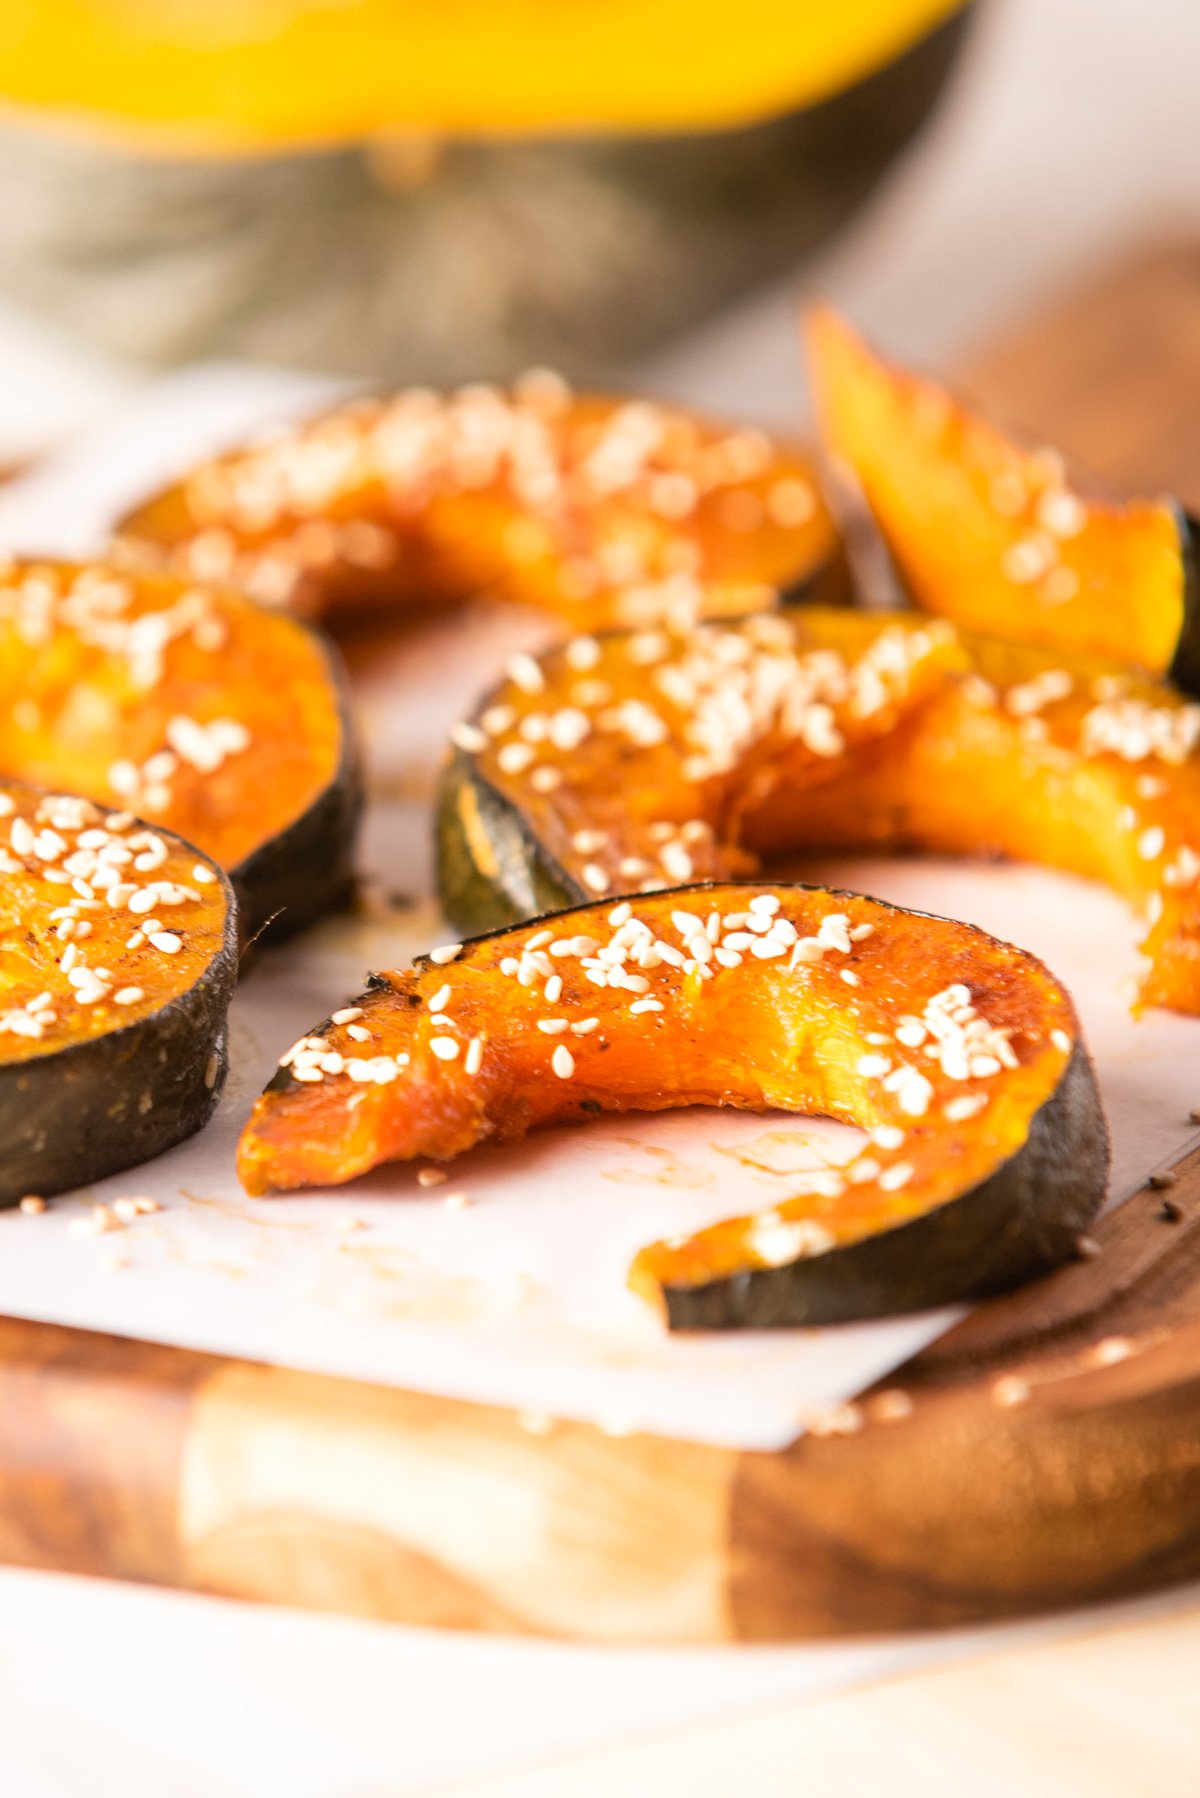 Close up of slices of kabocha squash sprinkled with sesame seeds.